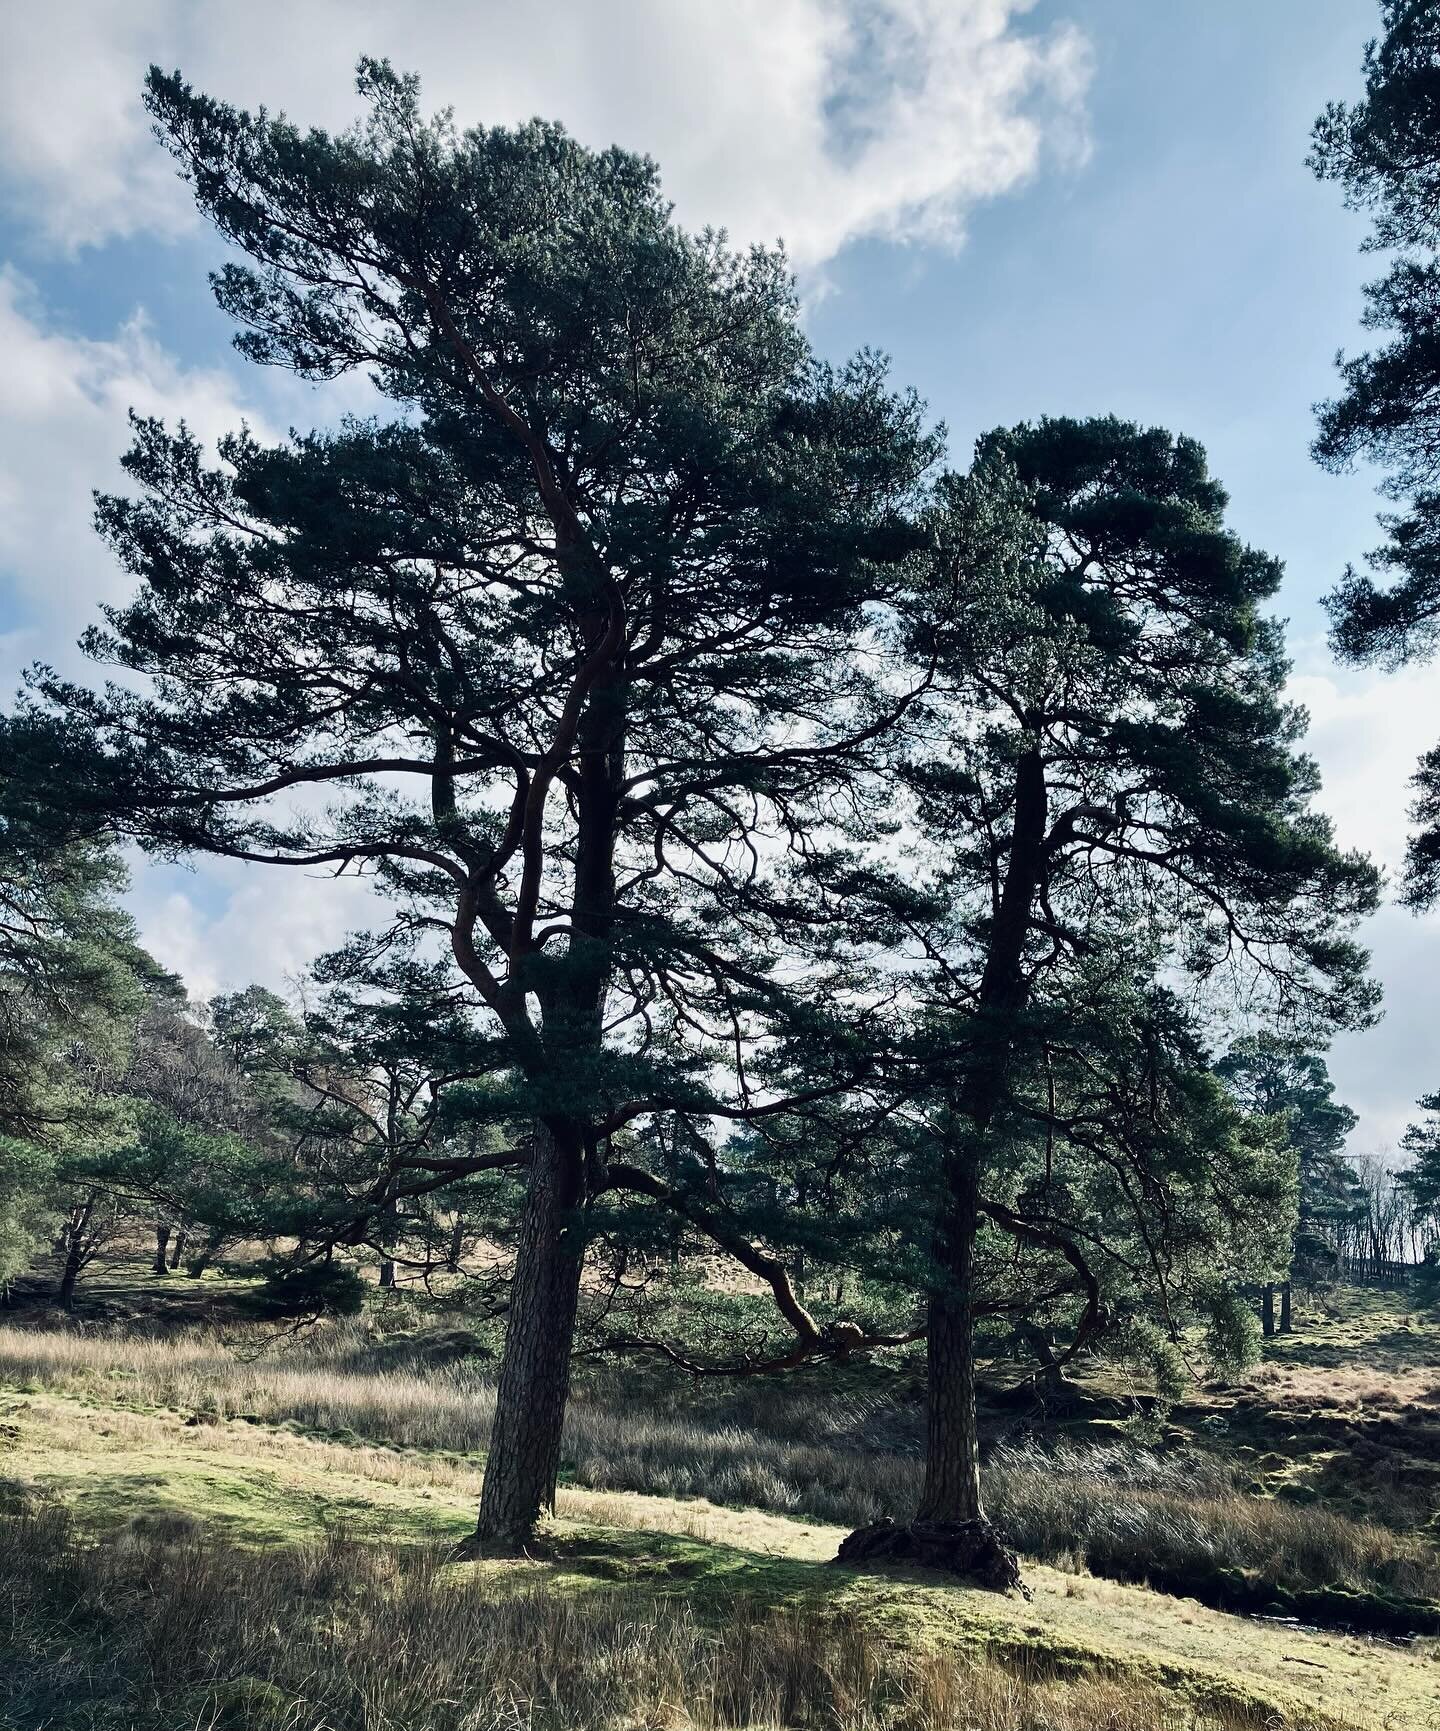 Two Scots pine Trees of the Day from my bike ride through the Trough of Bowland today.